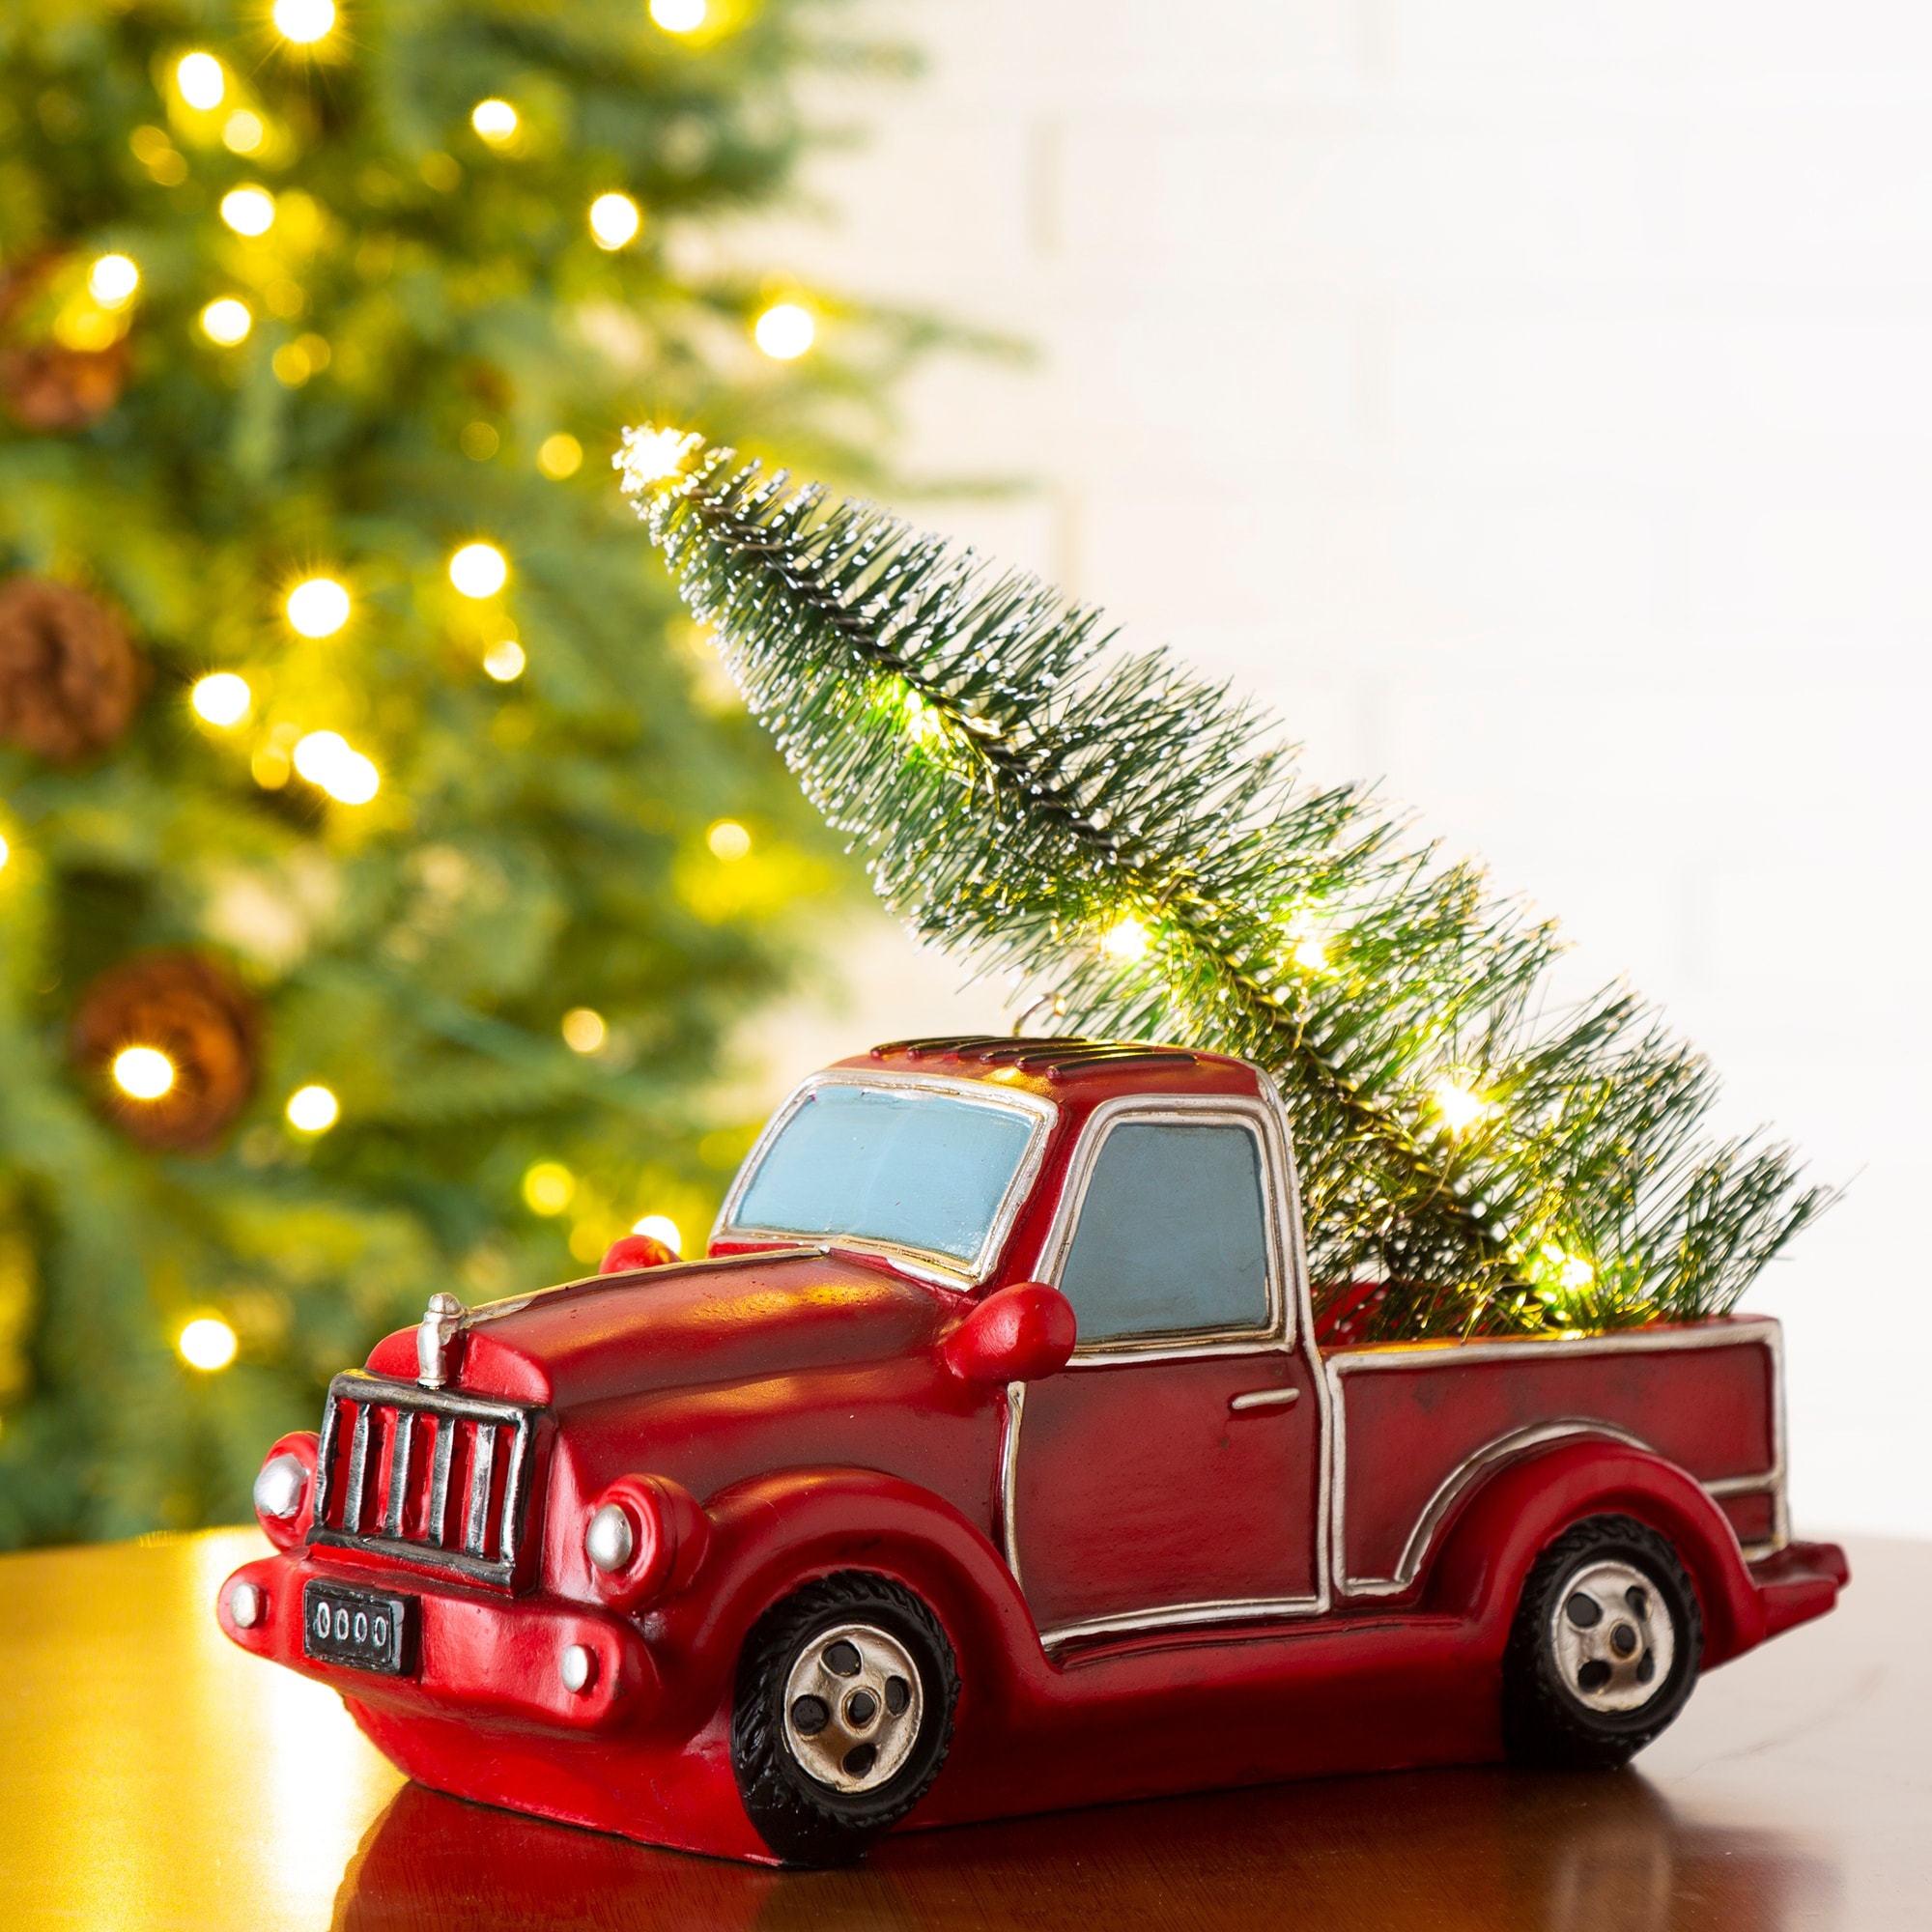 Glitzhome Led Lighted Red Truck Christmas Table Decor 11 L 5 2 W 6 H On Sale Overstock 23006655